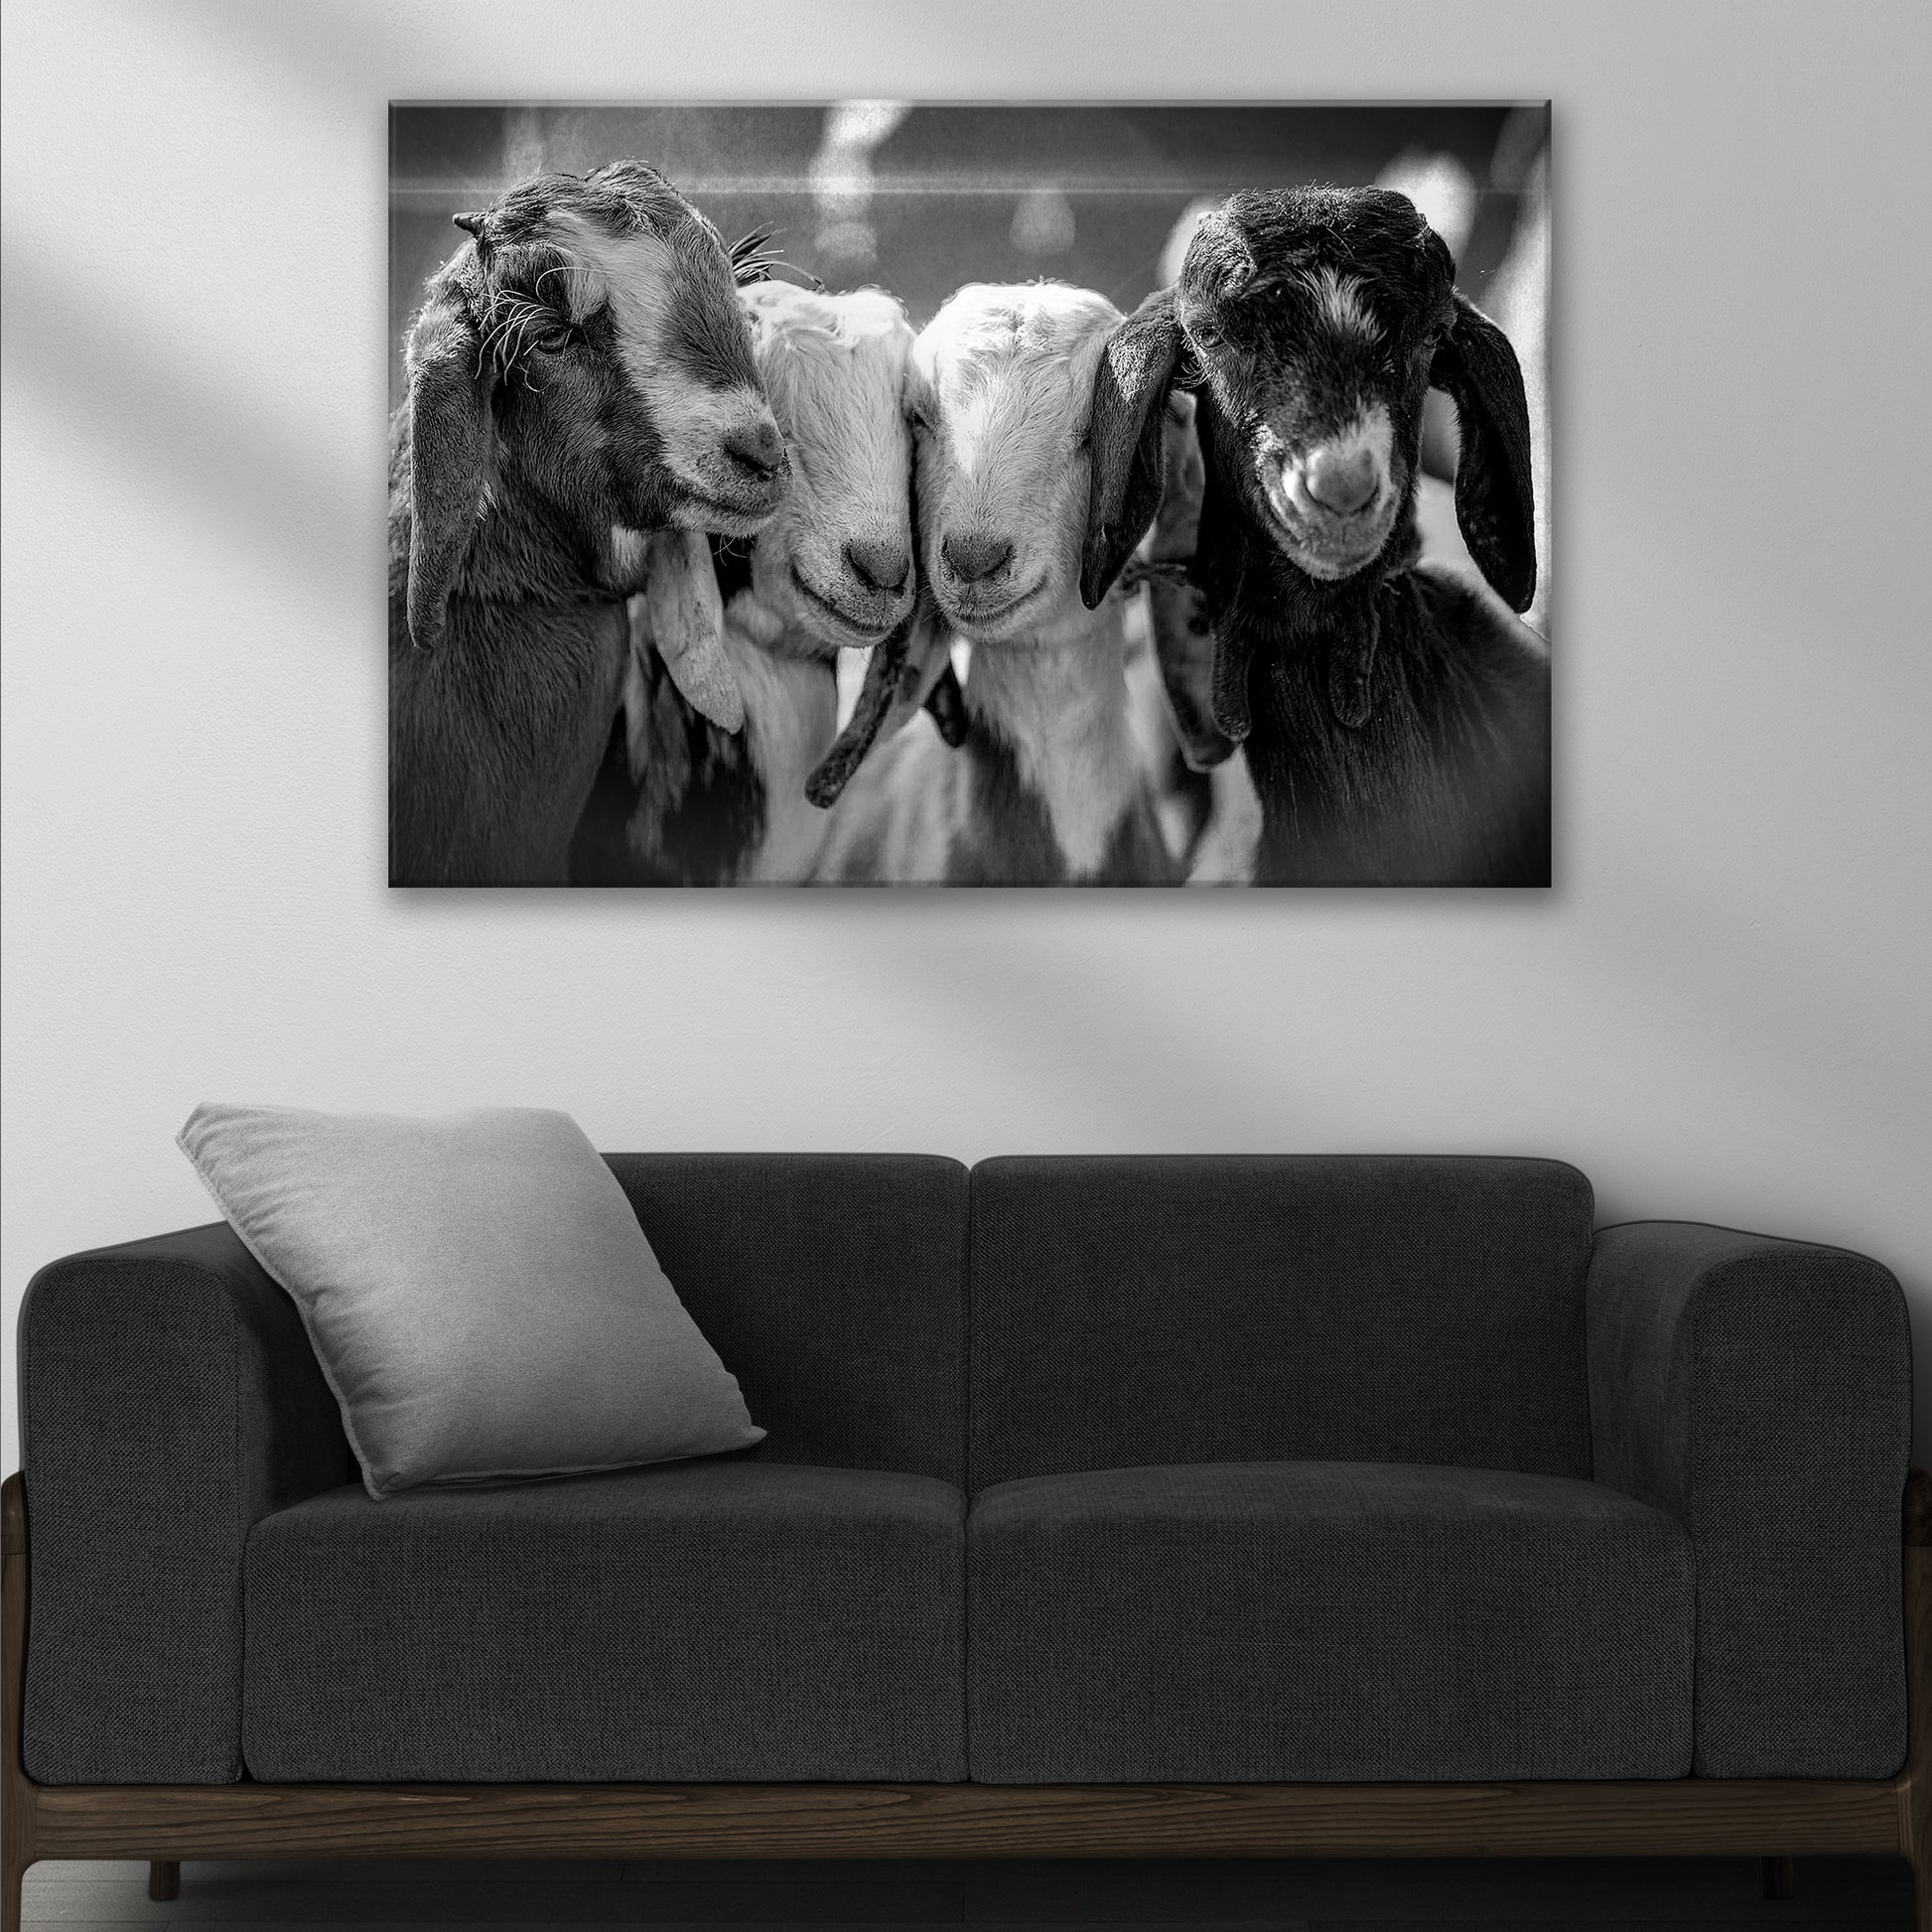 Black And White Baby Goats Canvas Wall Art Style 2 - Image by Tailored Canvases